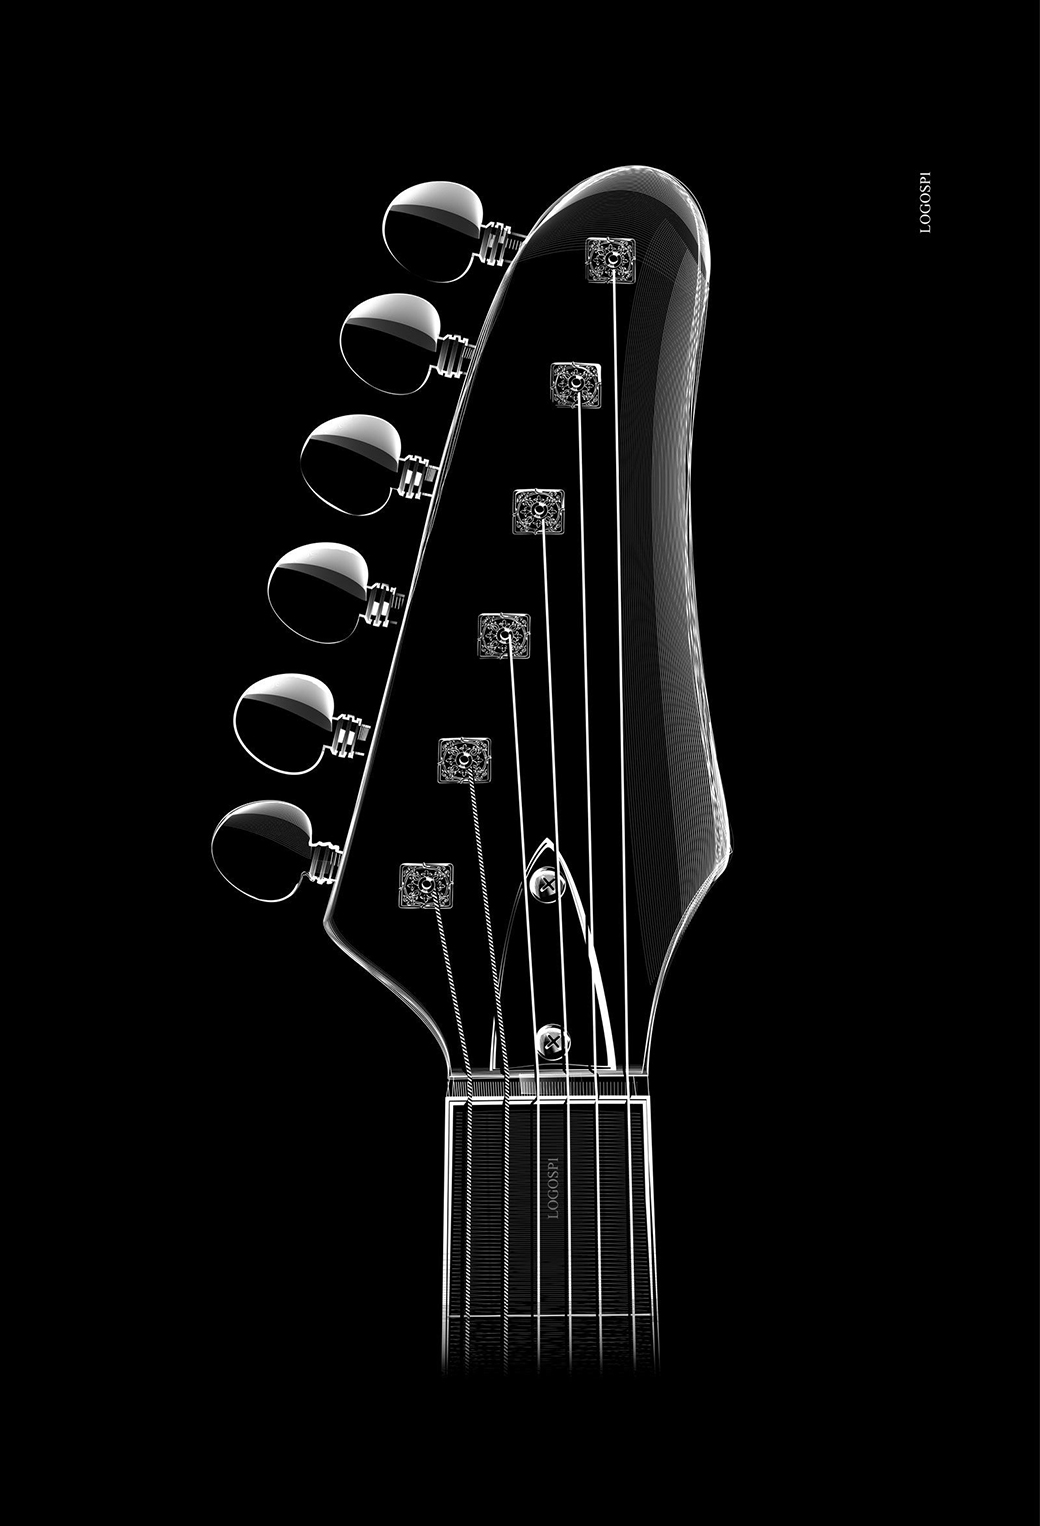 Acoustic Guitar Iphone Wallpapers